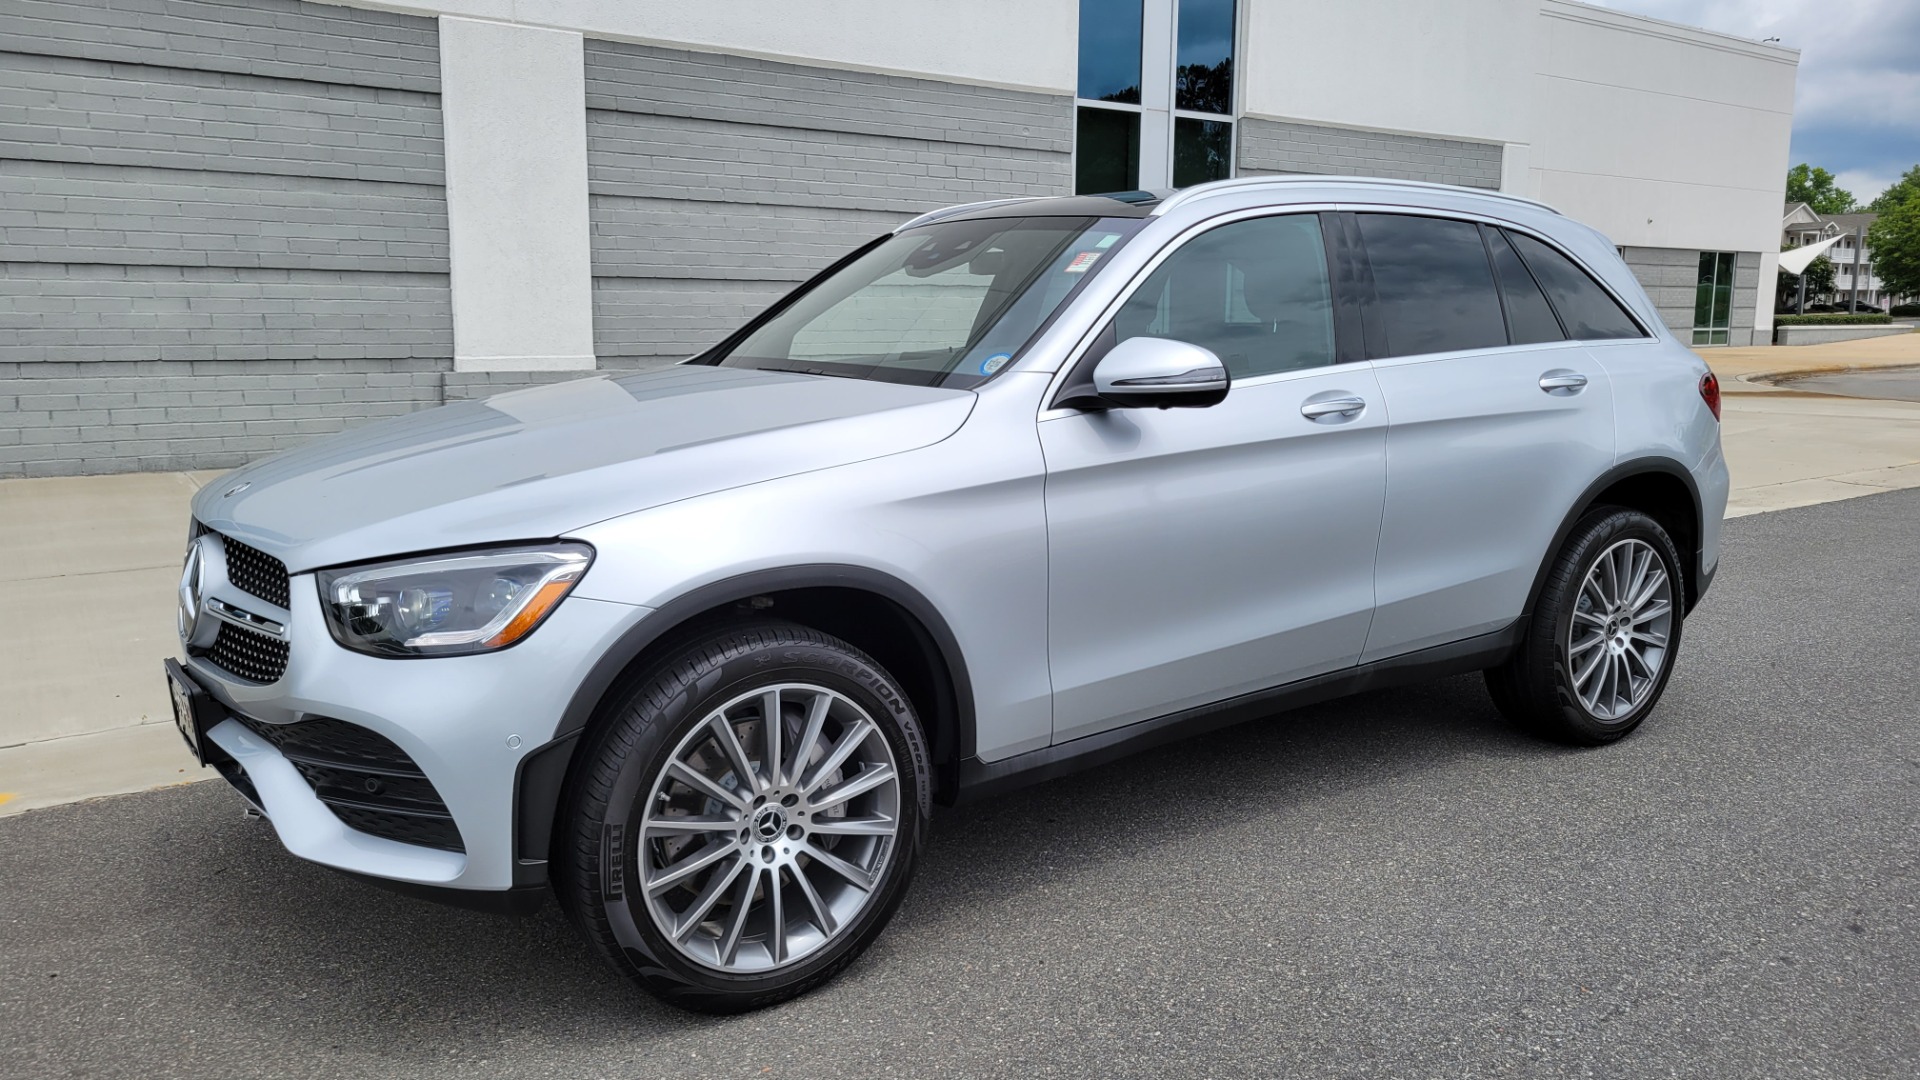 Used 2020 Mercedes-Benz GLC 300 PREMIUM / MULTIMEDIA / PARK ASST / LIGHTING / PANO-ROOF / CAMERA for sale $48,999 at Formula Imports in Charlotte NC 28227 3